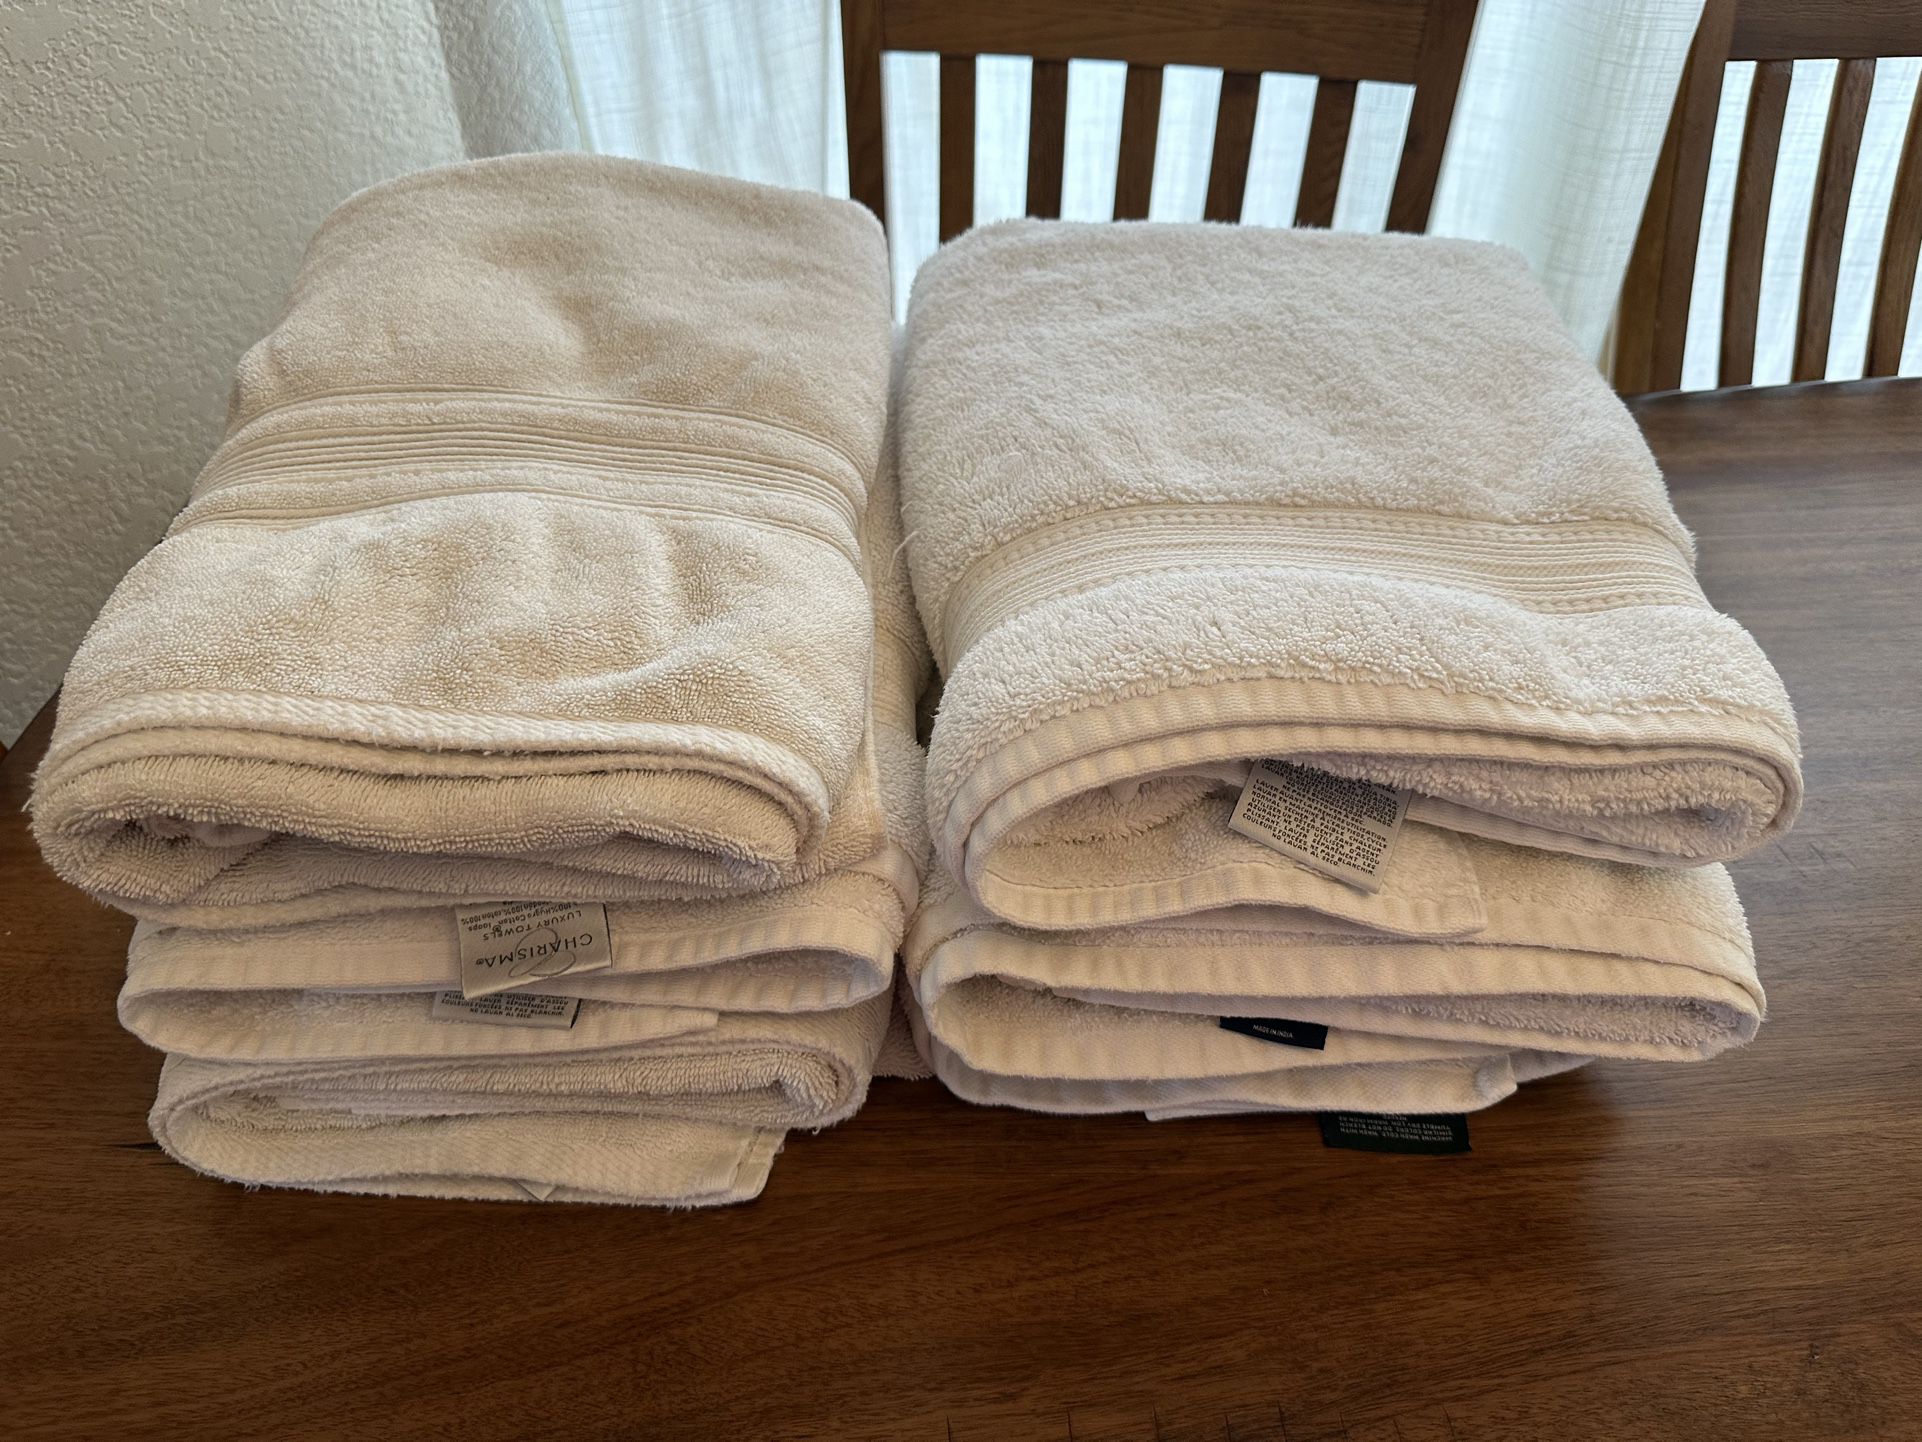 Free Towels (today Only 5/1) PENDING PICKUP